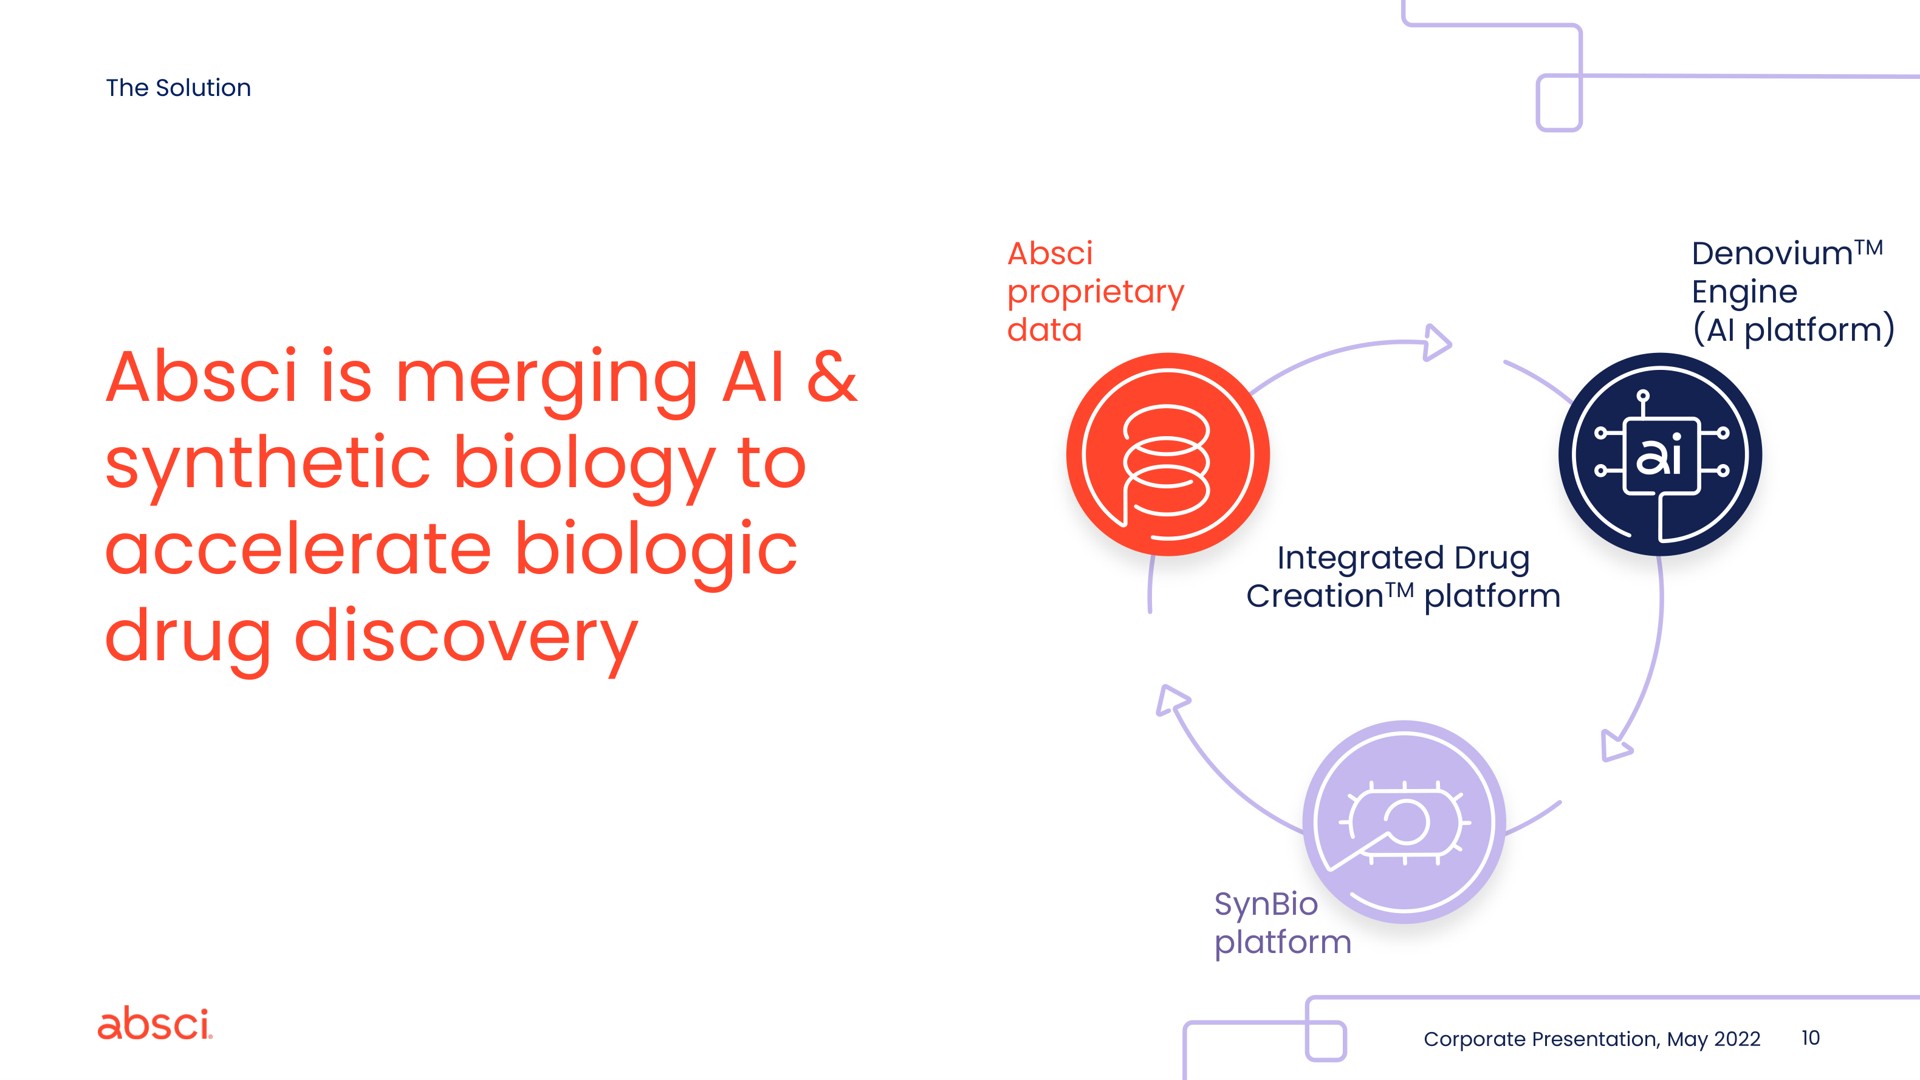 is merging synthetic biology to accelerate biologic drug discovery | Absci